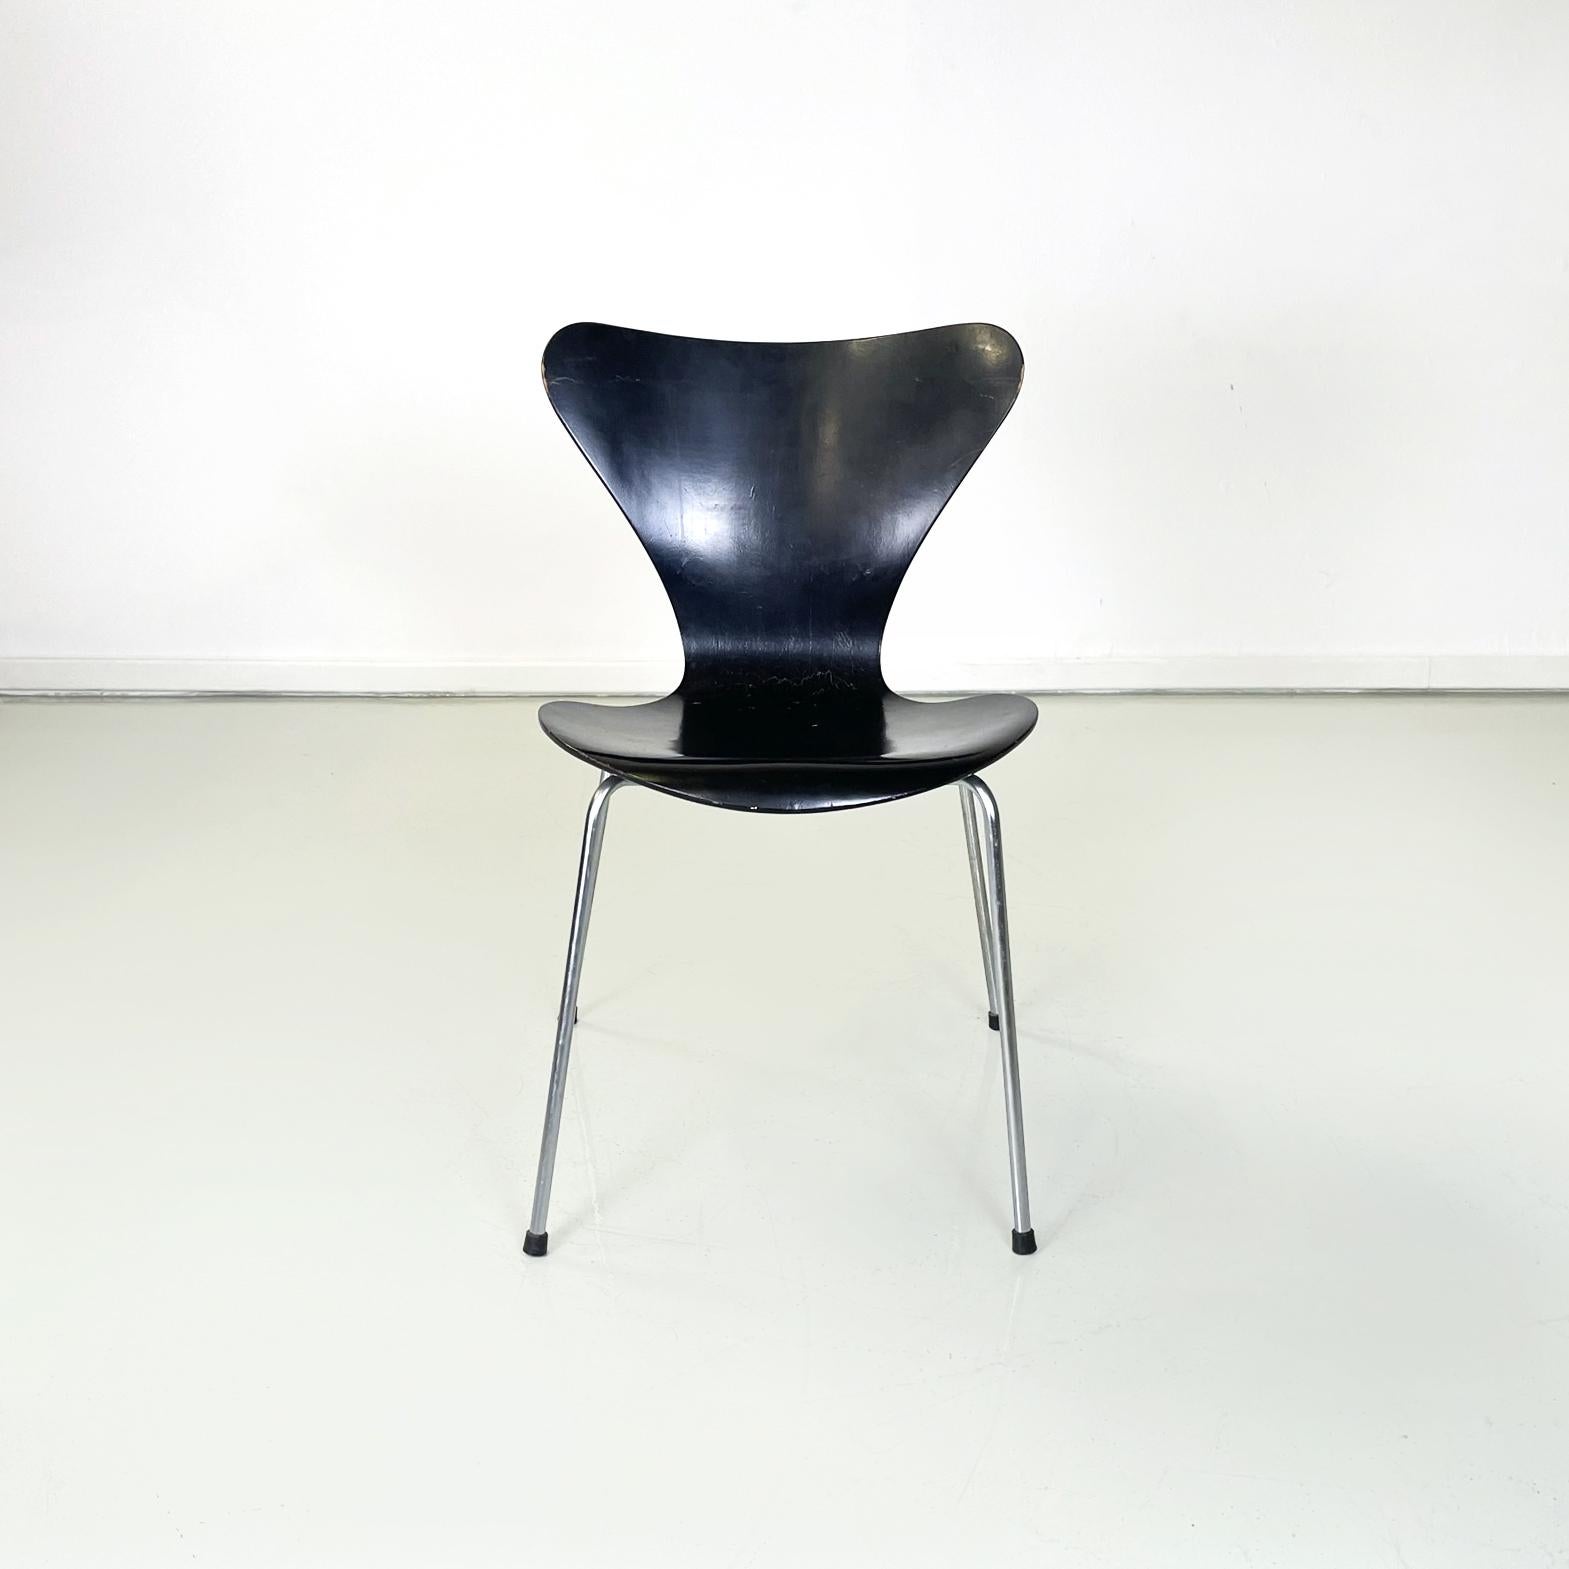 Danish modern Black wood Chairs 7 Series by Jacobsen for Fritz Hansen, 1970s
Set of 4 danish chairs mod. 0465 or 7 Series in black painted wood. The legs are in steel with black rubber feet.
They are produced by Fritz Hansen in 1970s and designed by